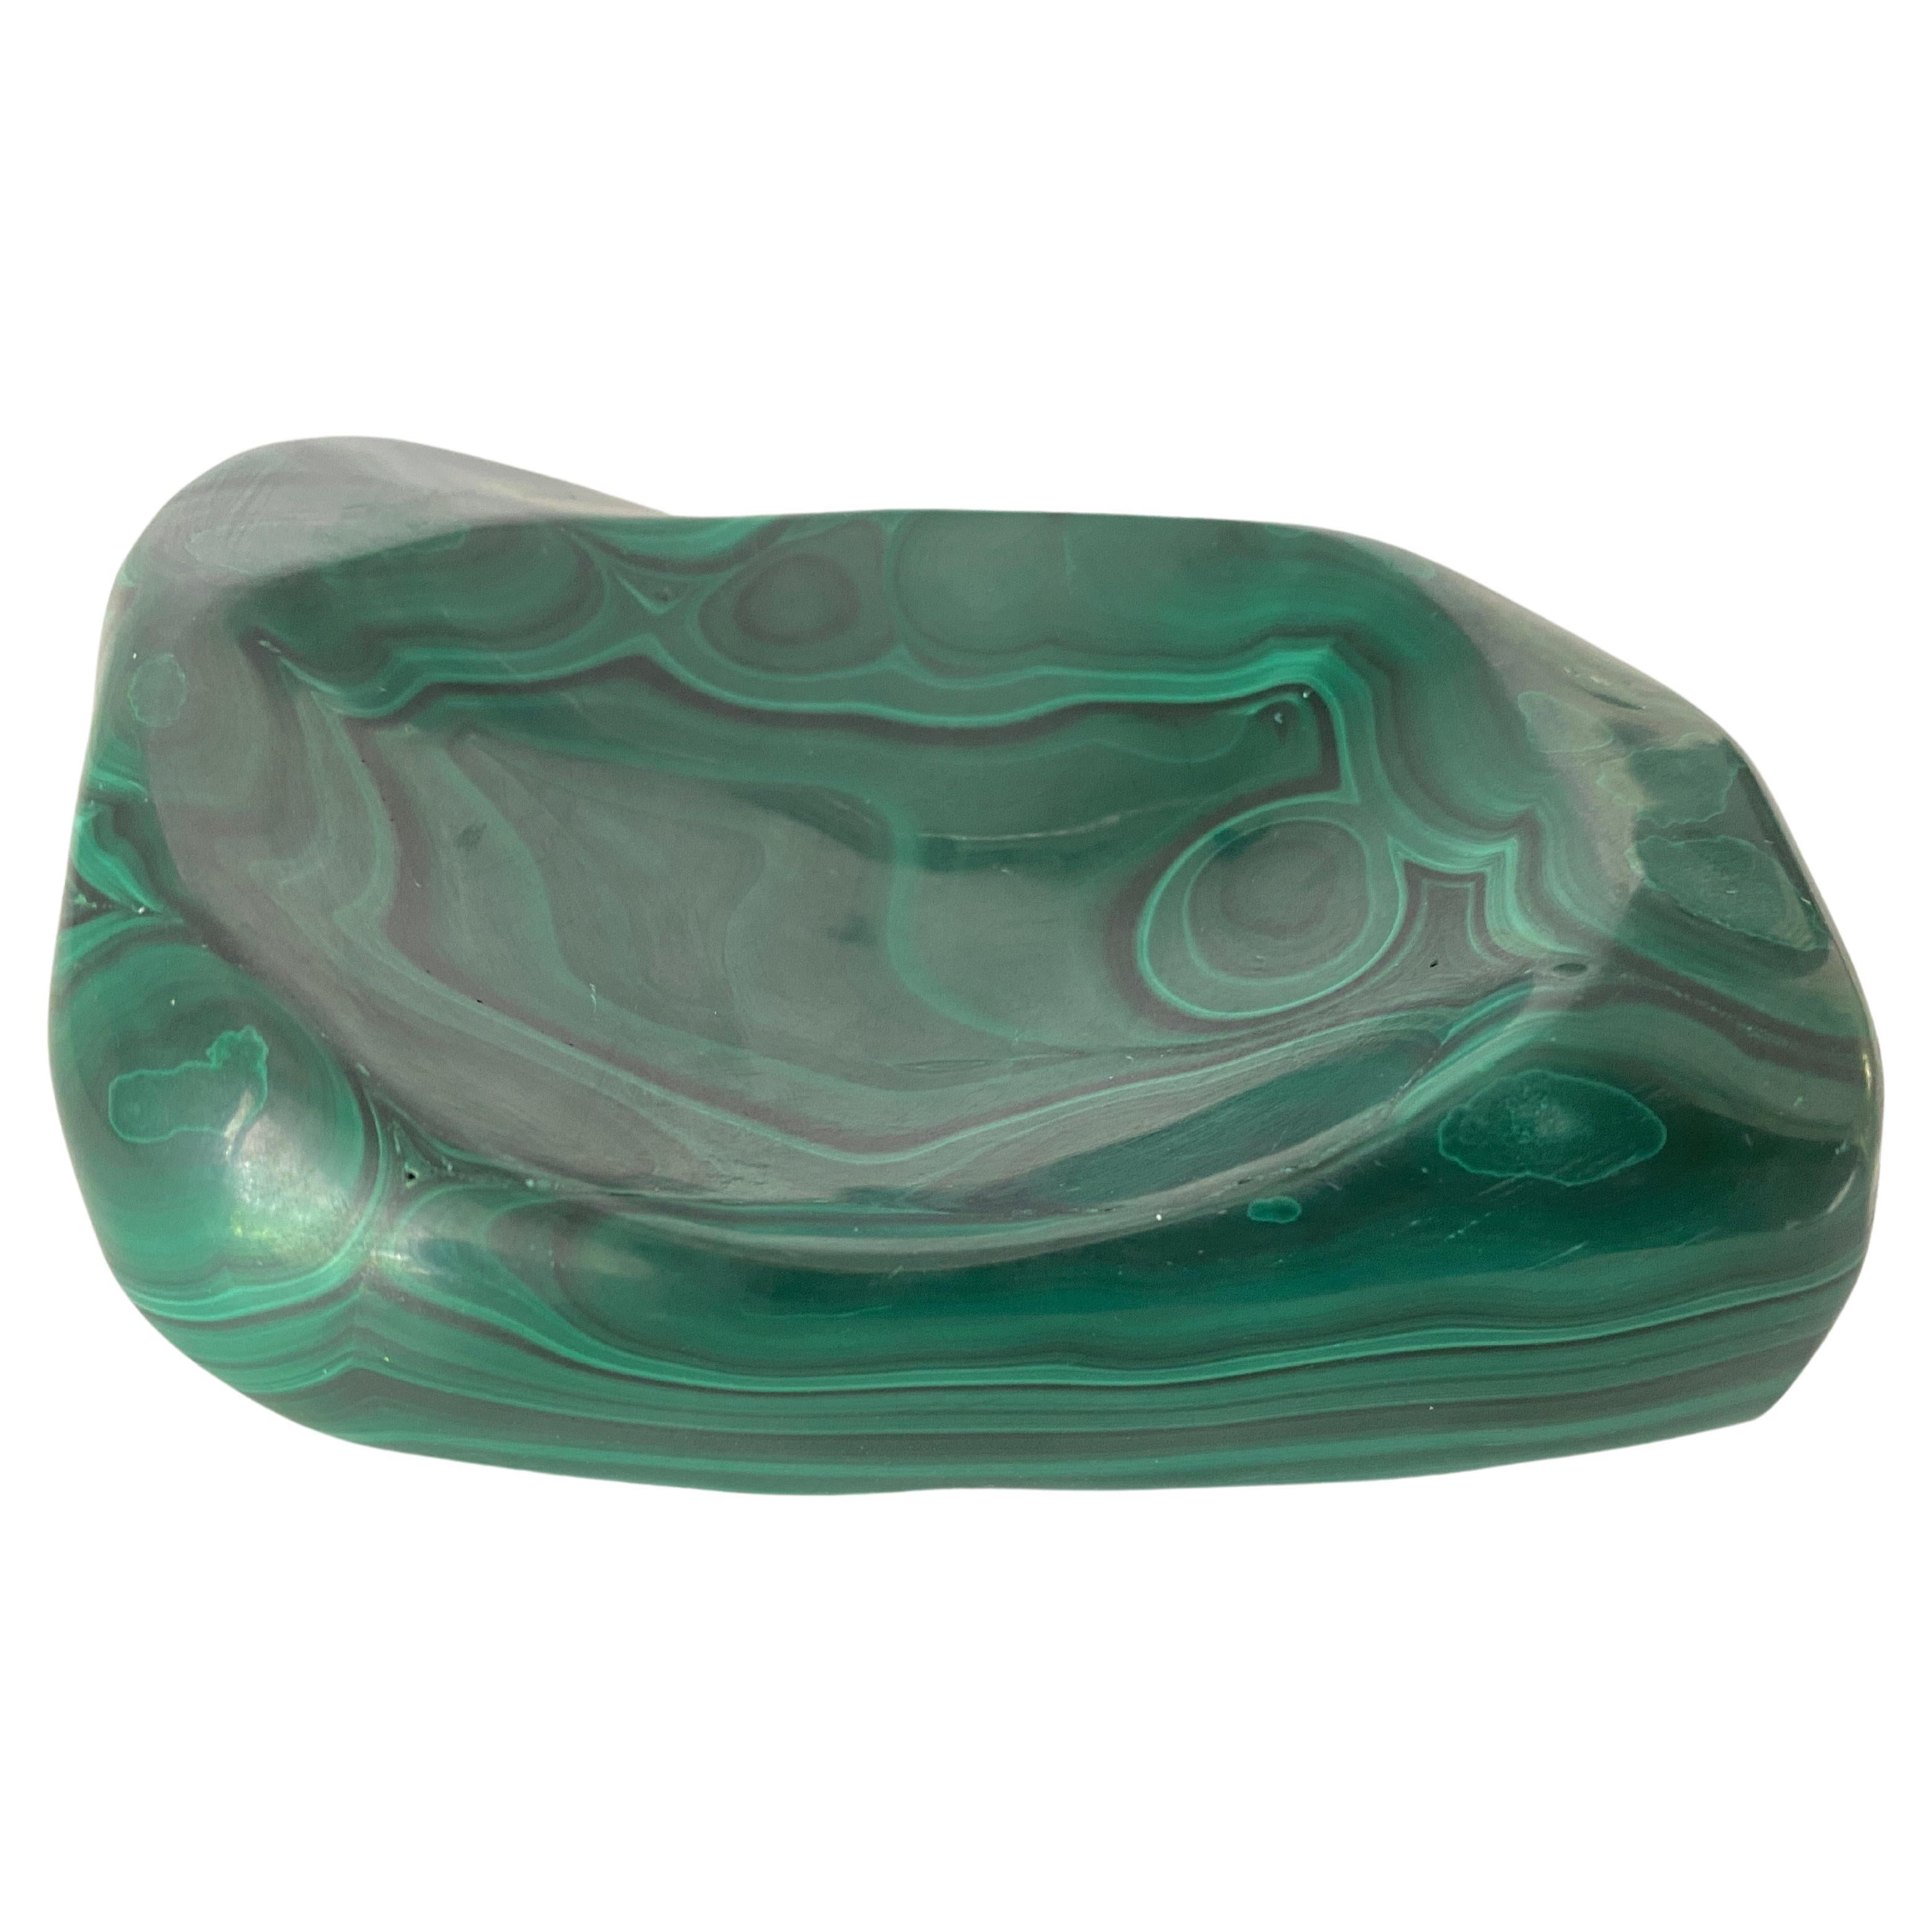 Great and unique shape carved malachite stone ashtray or vide poche. Imposing item, stunning color and pattern which makes it unique. Natural malachite sculpture. Some are called vide poche or ashtray dresser caddy or valet tray and sundries bowl.